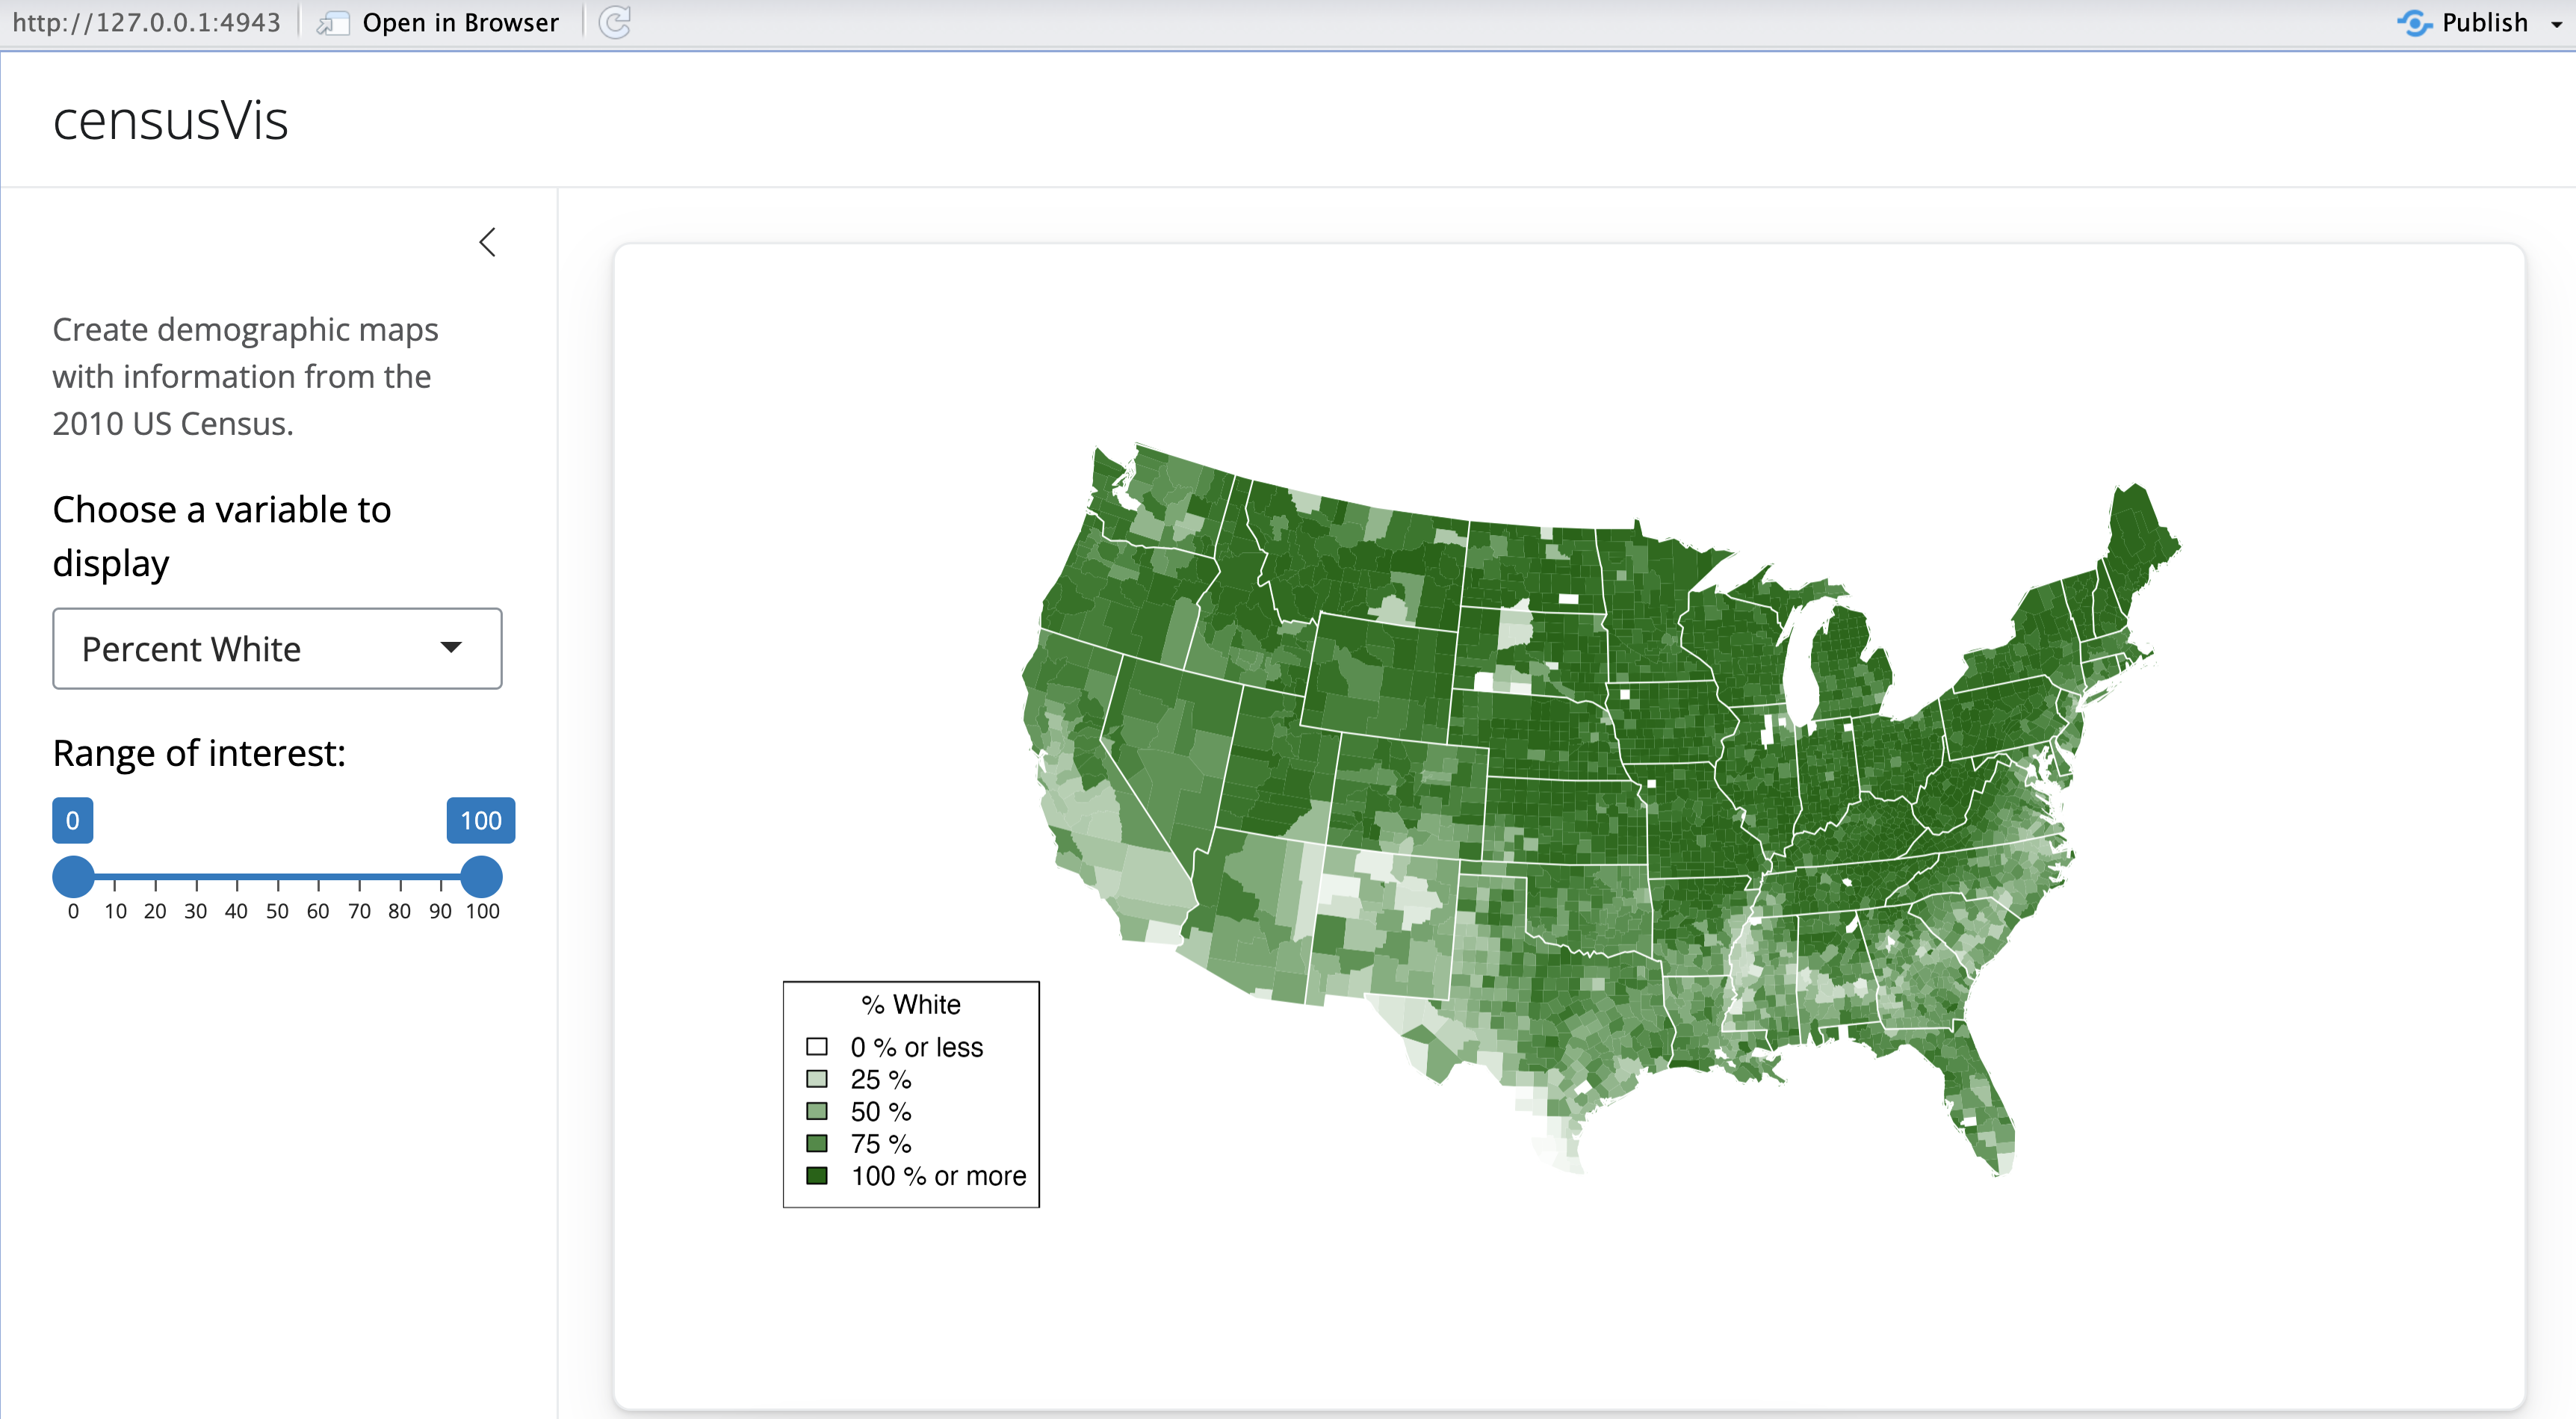 censusVis app with Percent White chosen as the variable to display, and the US map associated with that selection